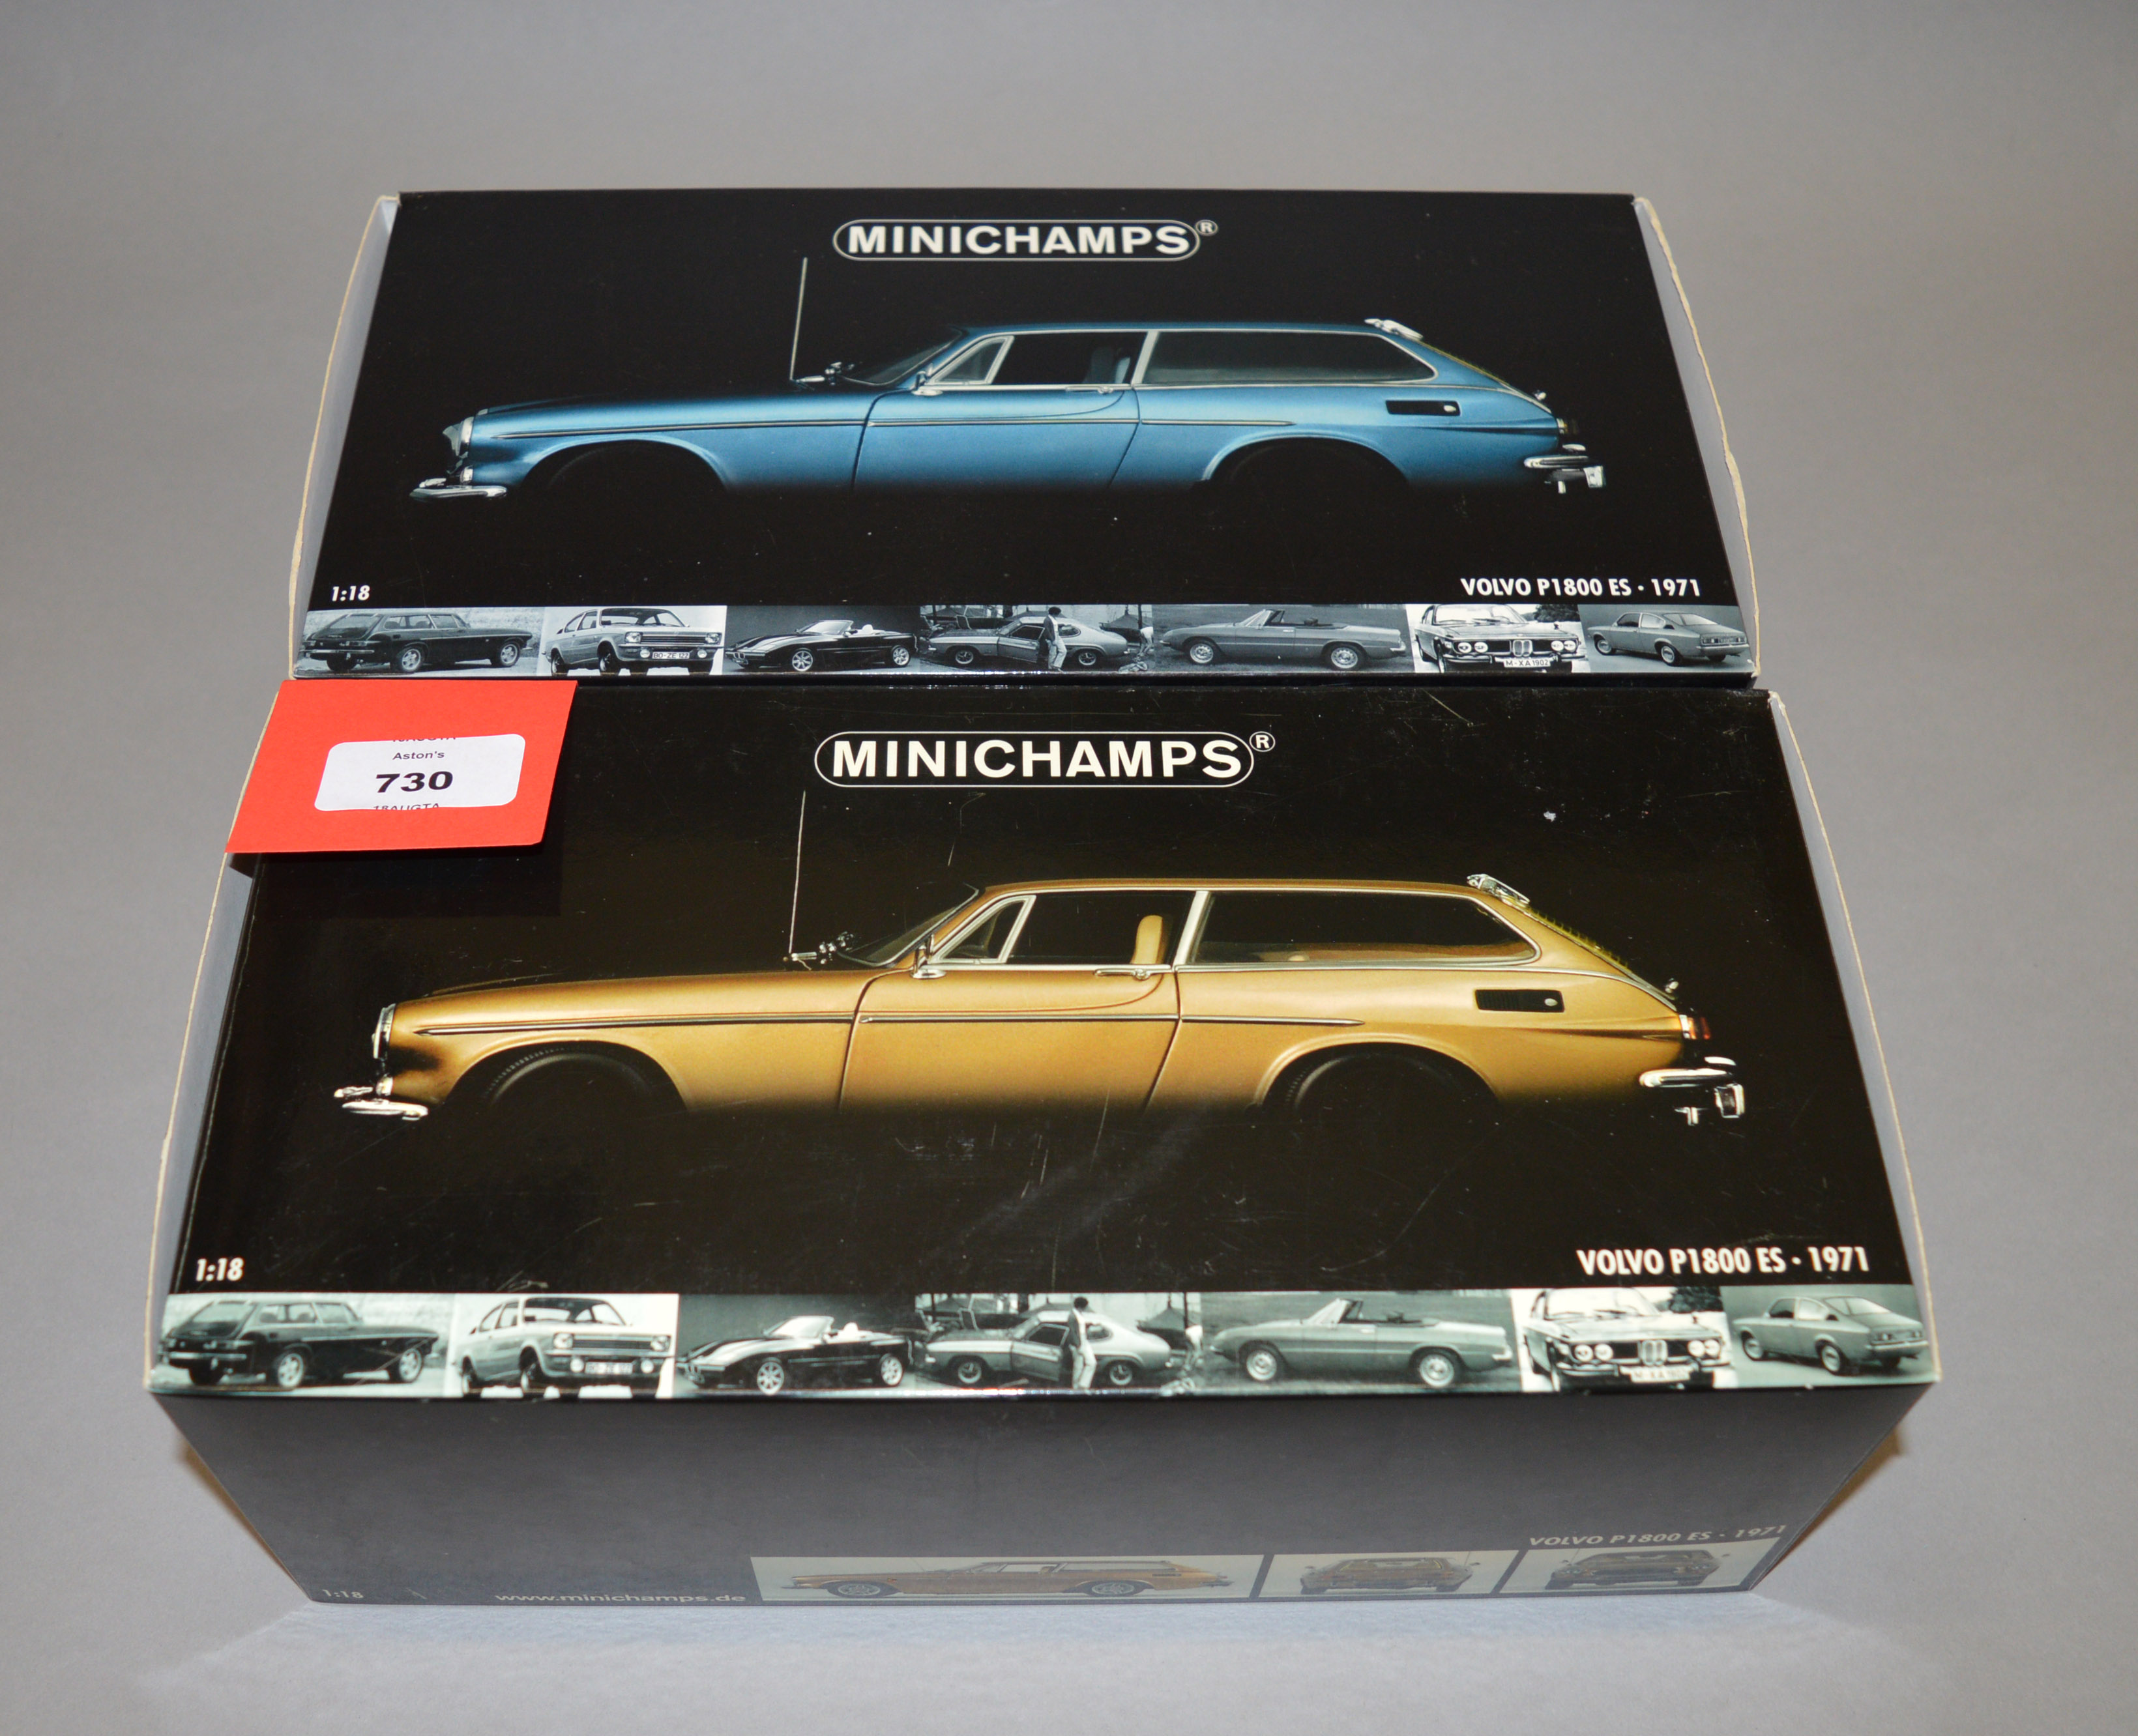 Two boxed Minichamps Volvo P1800 ES (1971) diecast model cars in 1:18 scale,